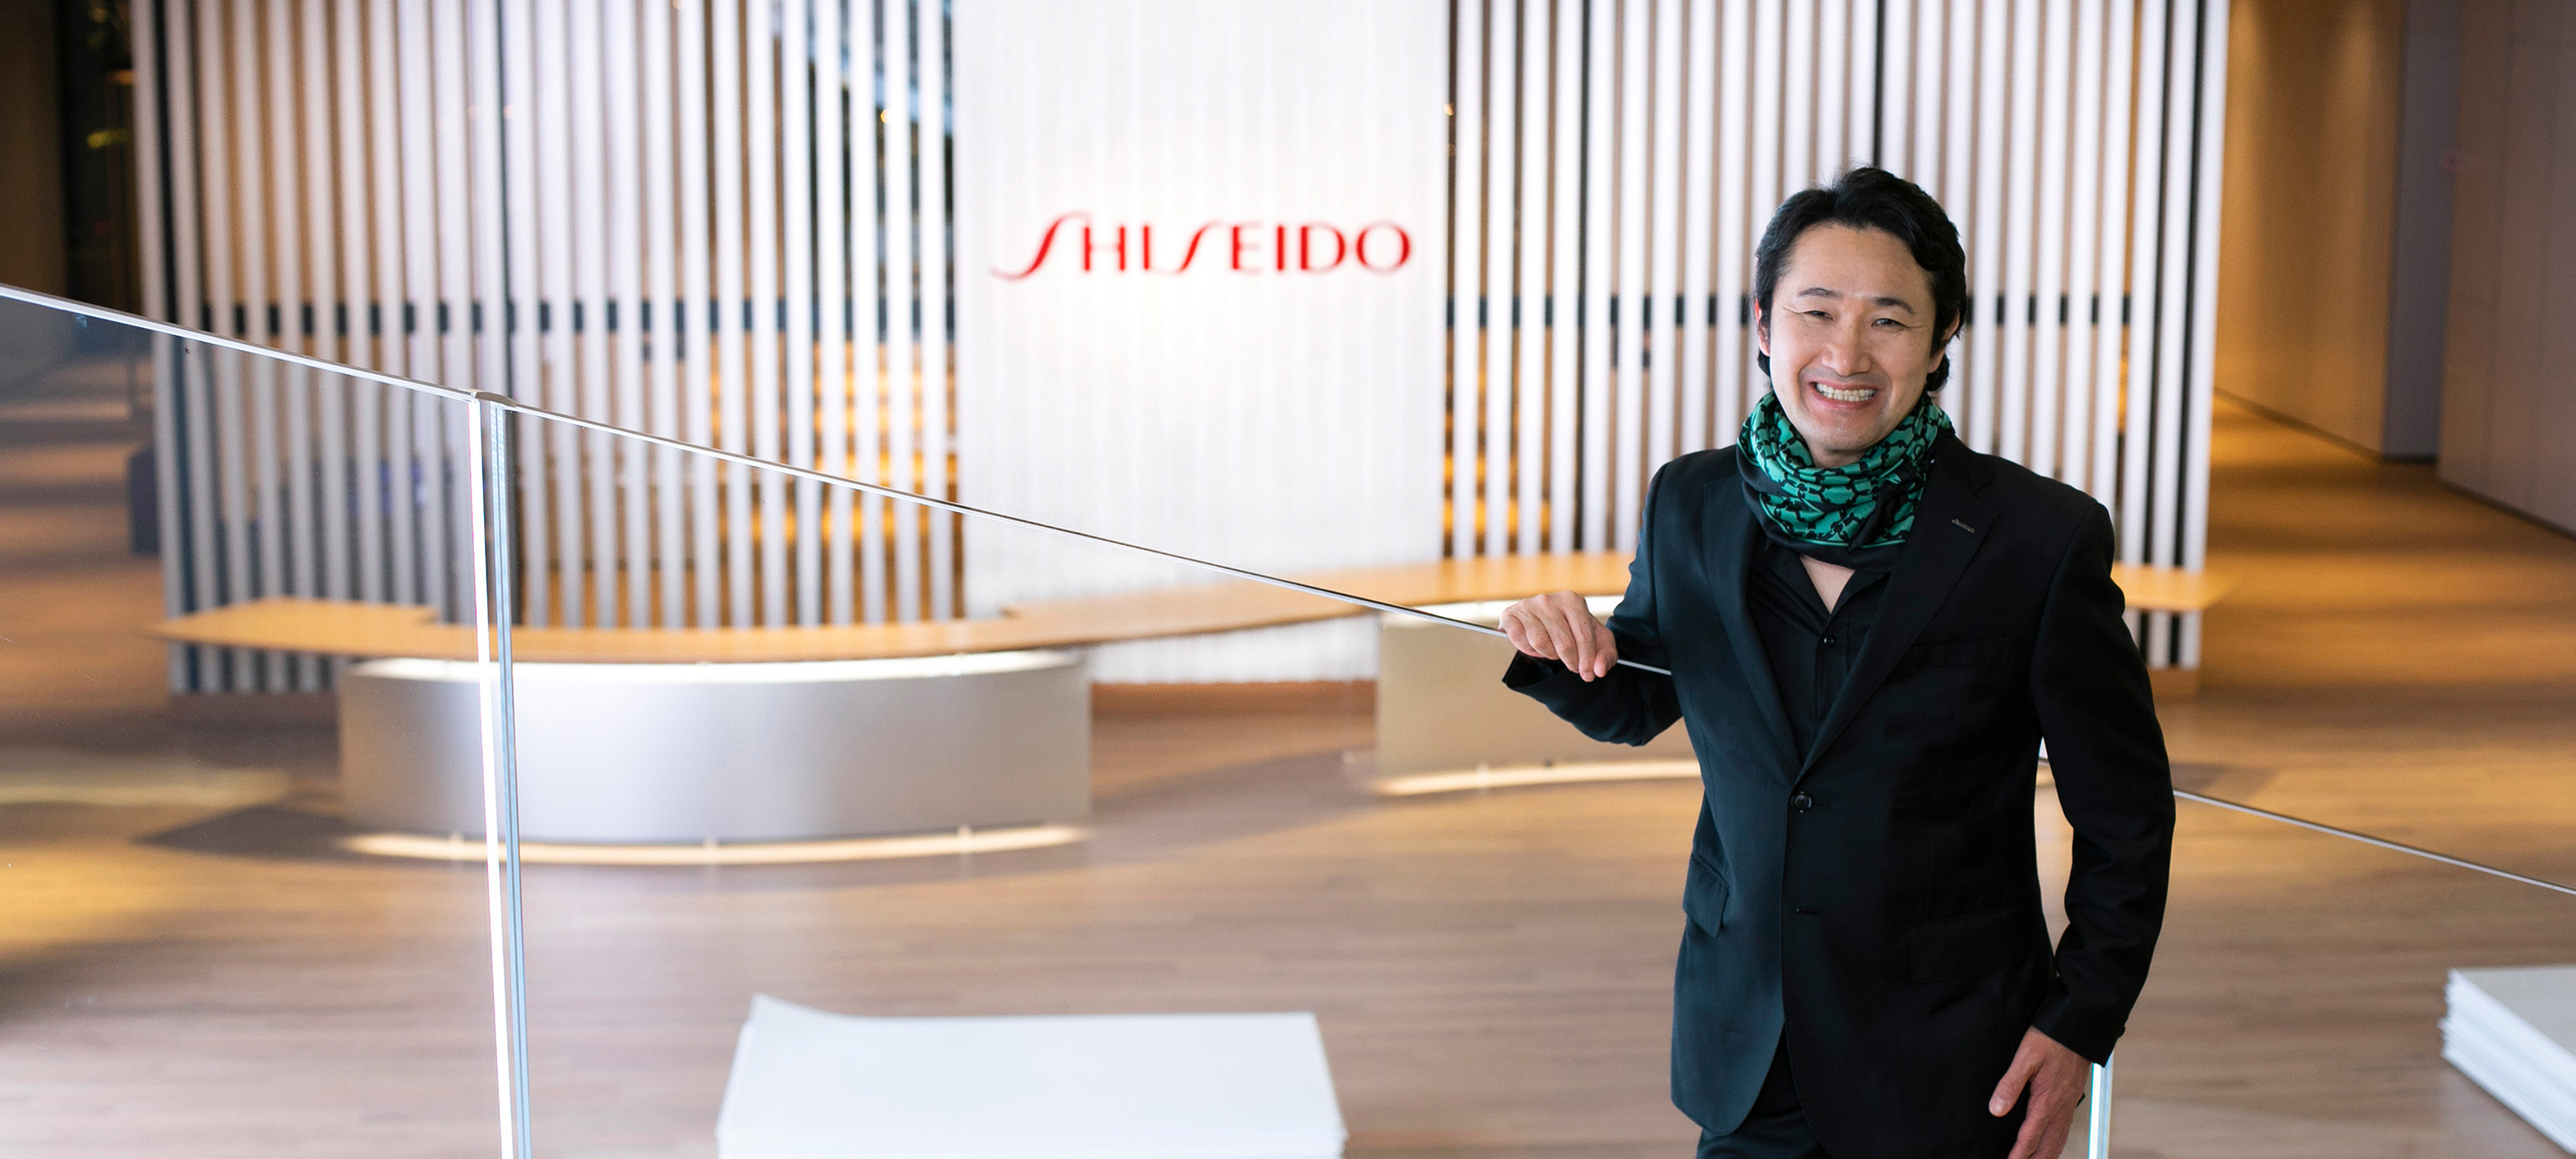 Exquisitely fusing two seemingly opposite values into a “DYNAMIC HARMONY”. The new growth strategy in Shiseido’s R&D